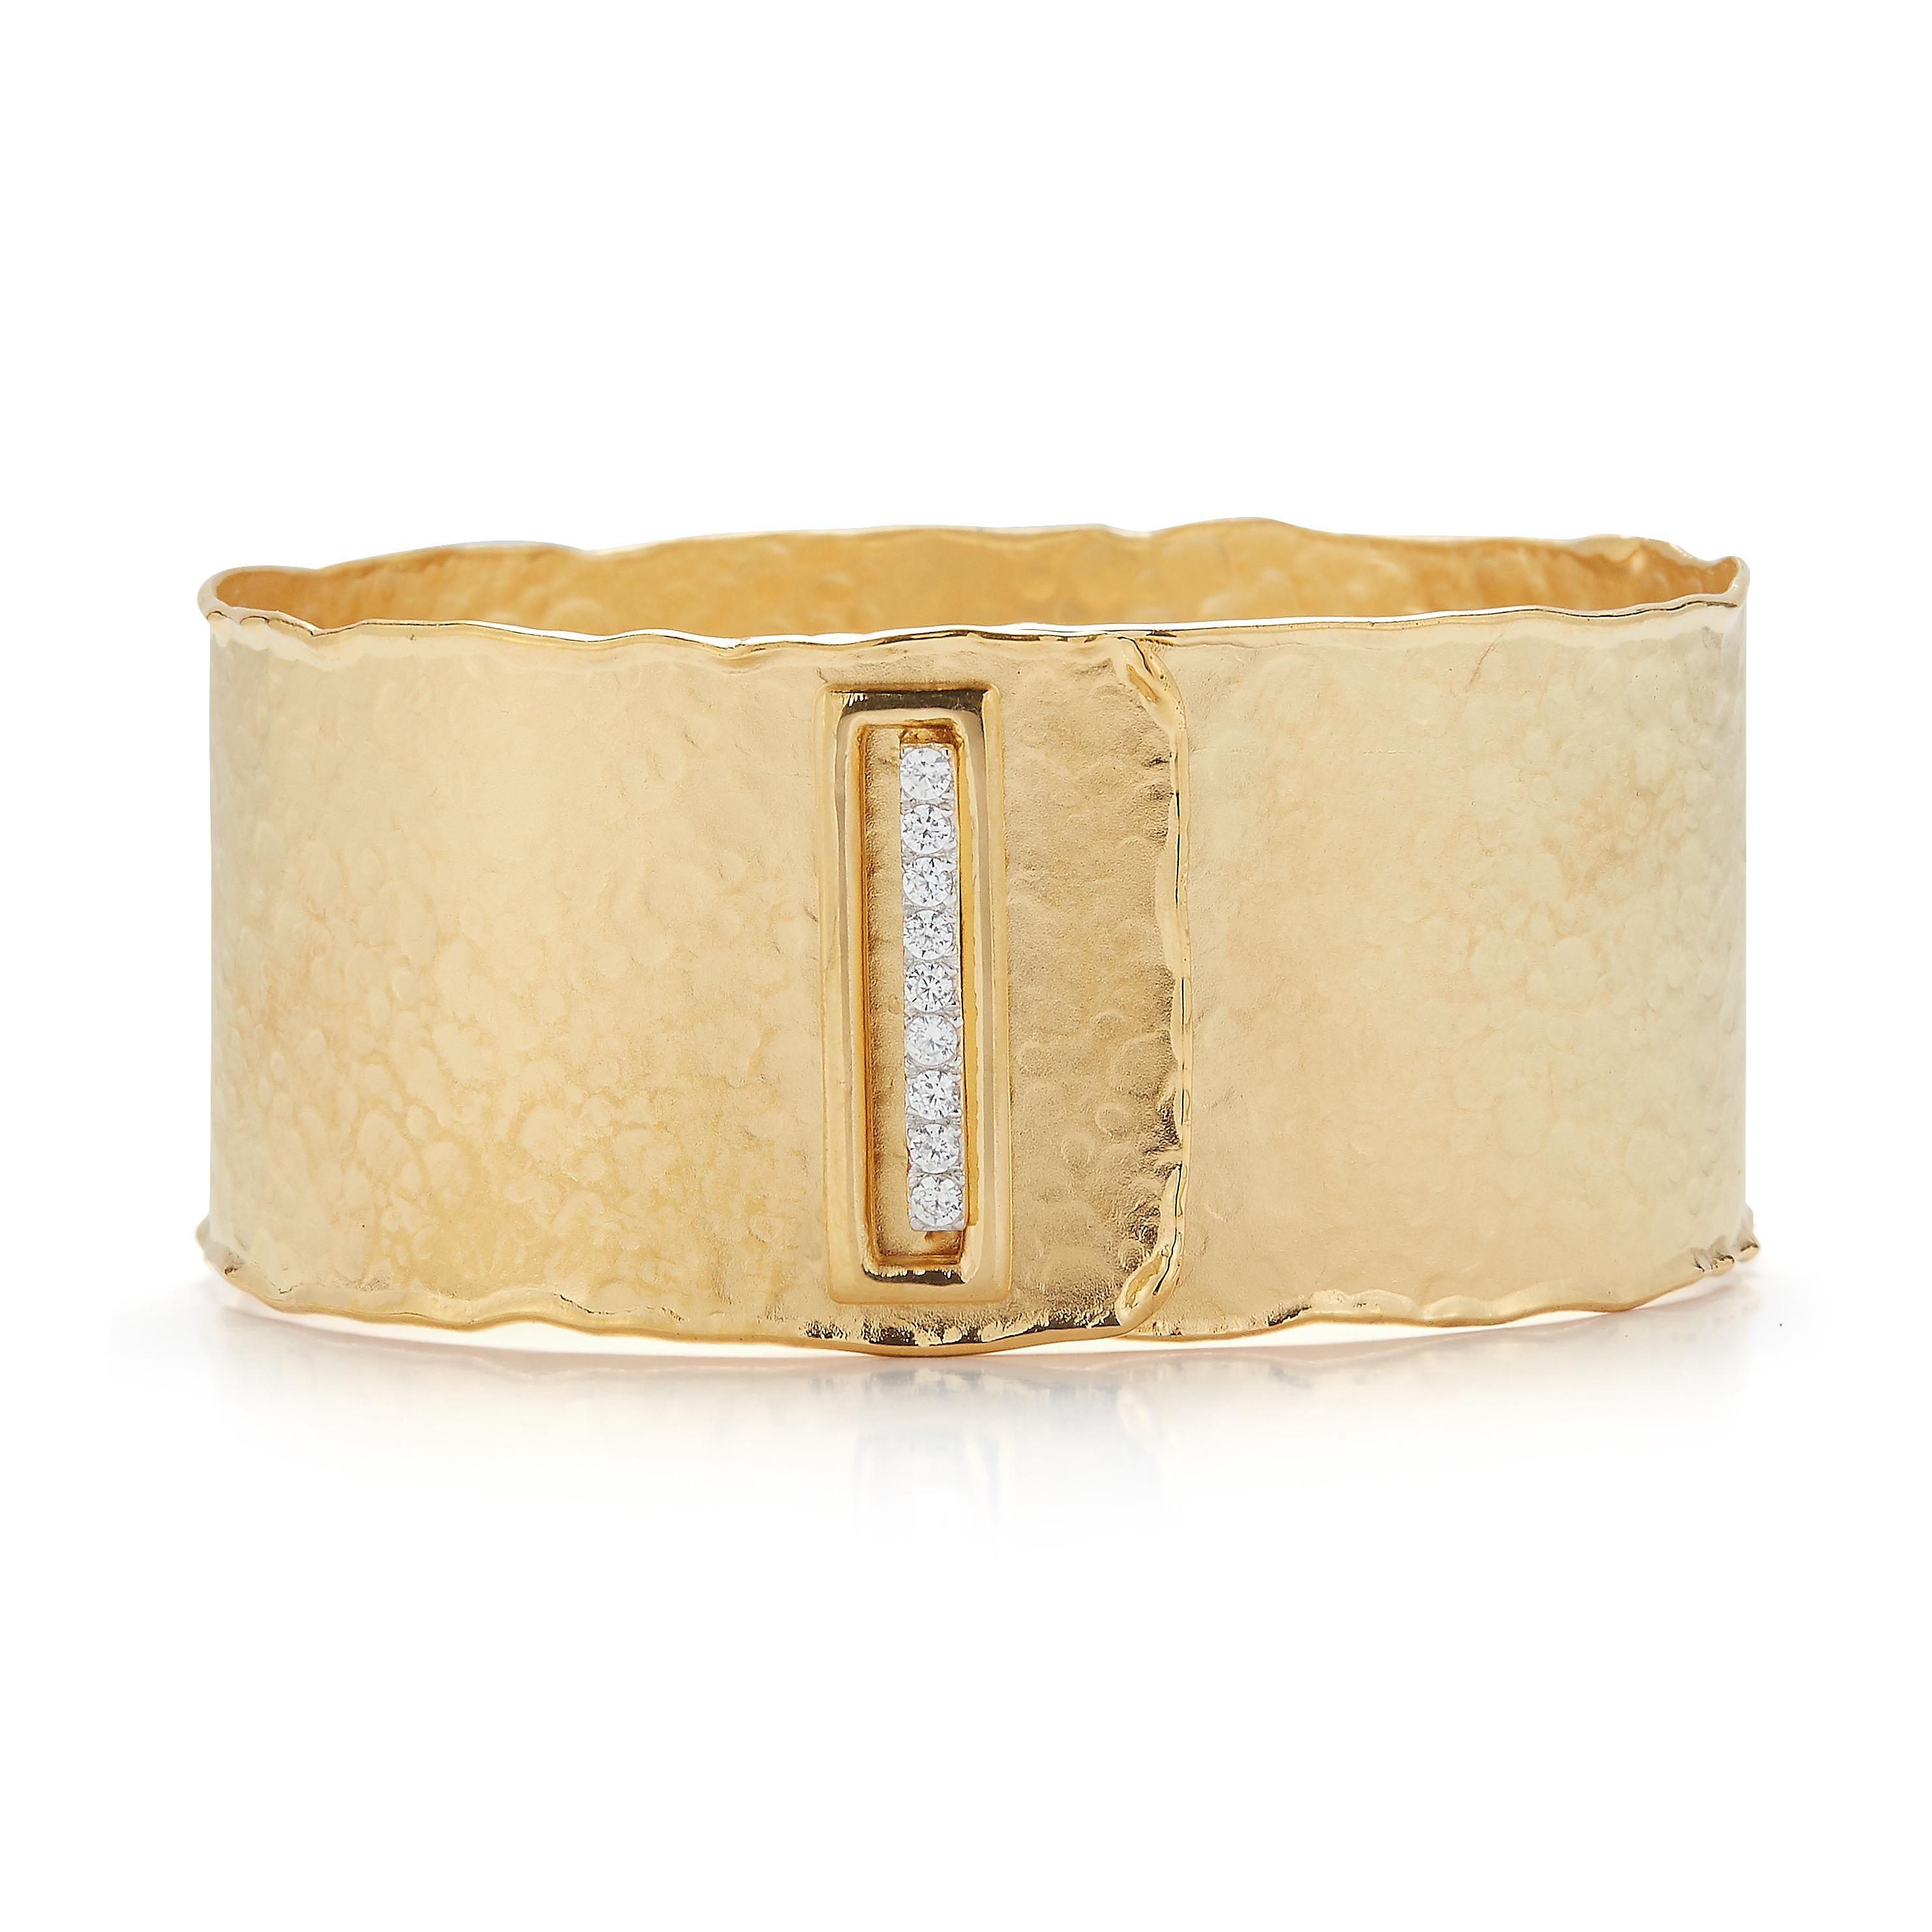 14 Karat Yellow Gold Hand-Crafted Matte and Hammer-Finished Scallop-Edged Cuff Bracelet, Enhanced with 0.36 Carats of a Pave Set Diamond Buckle Closure.
